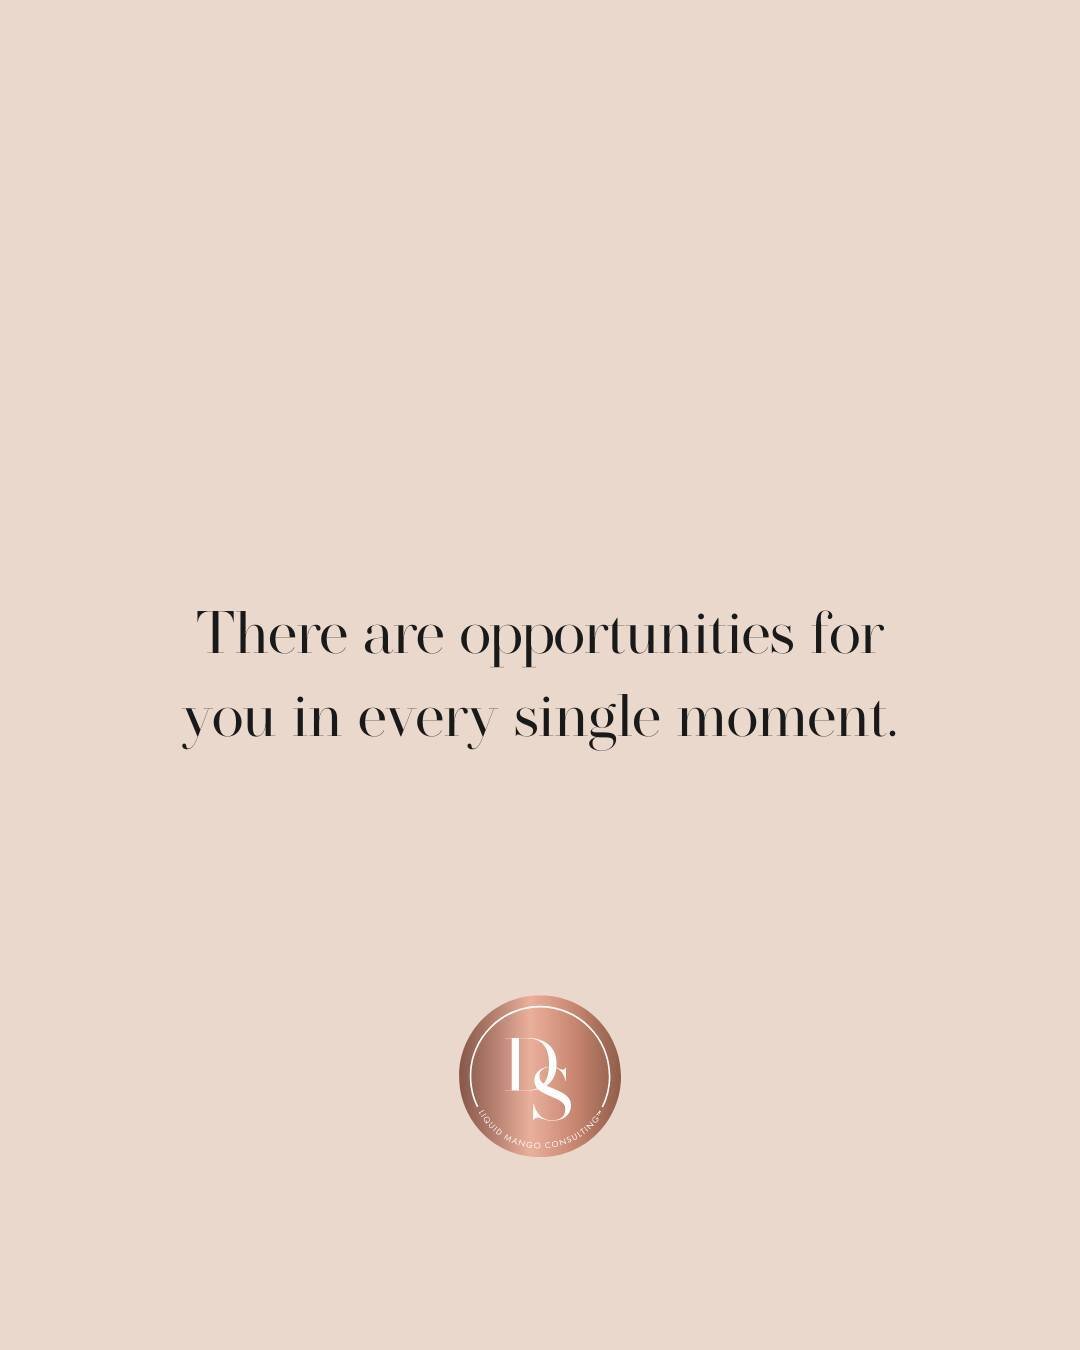 There are opportunities for you in every single moment.

𝘛𝘩𝘦 𝘬𝘦𝘺 𝘪𝘴 𝘵𝘰 𝘤𝘳𝘦𝘢𝘵𝘦 𝘴𝘱𝘢𝘤𝘦, 𝘱𝘢𝘶𝘴𝘦, 𝘵𝘶𝘯𝘦 𝘪𝘯 𝘢𝘯𝘥 𝘭𝘪𝘴𝘵𝘦𝘯.

So many invitations and opportunities can be missed when you're living on autopilot and rushing 